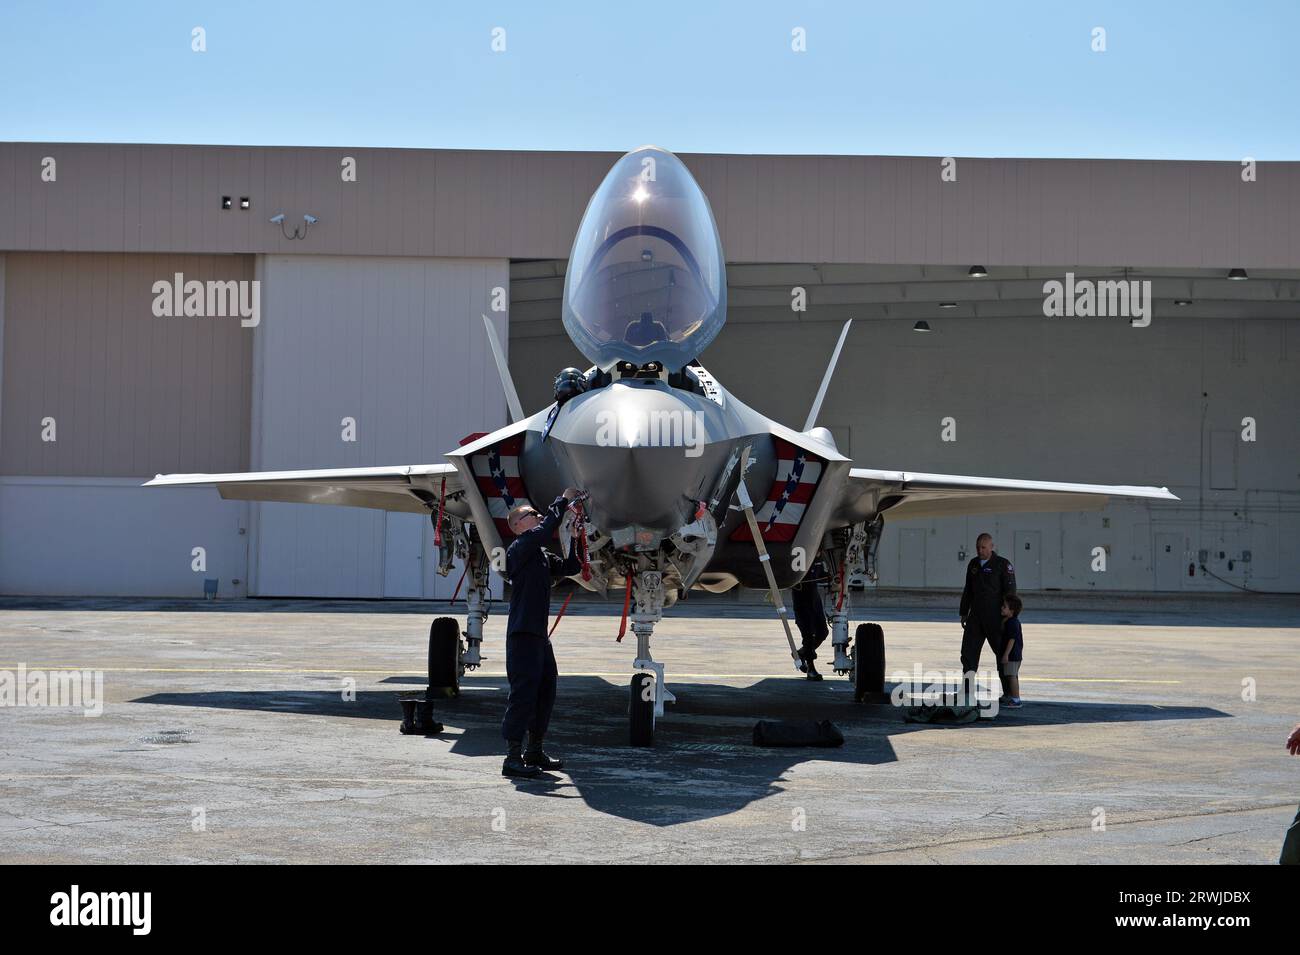 FORT LAUDERDALE, FLORIDA - MAY 05: F-35 Lightning II Joint Strike Fighter. This is the FIRST TIME the F35 is flying out of a civilian airport to support an air show seen here at a private FBO at Fort Lauderdale-Hollywood International Airport on May 5, 2016 in Fort Lauderdale, Florida. People: F-35 Lightning II Joint Strike Fighter Credit: Storms Media Group/Alamy Live News Stock Photo